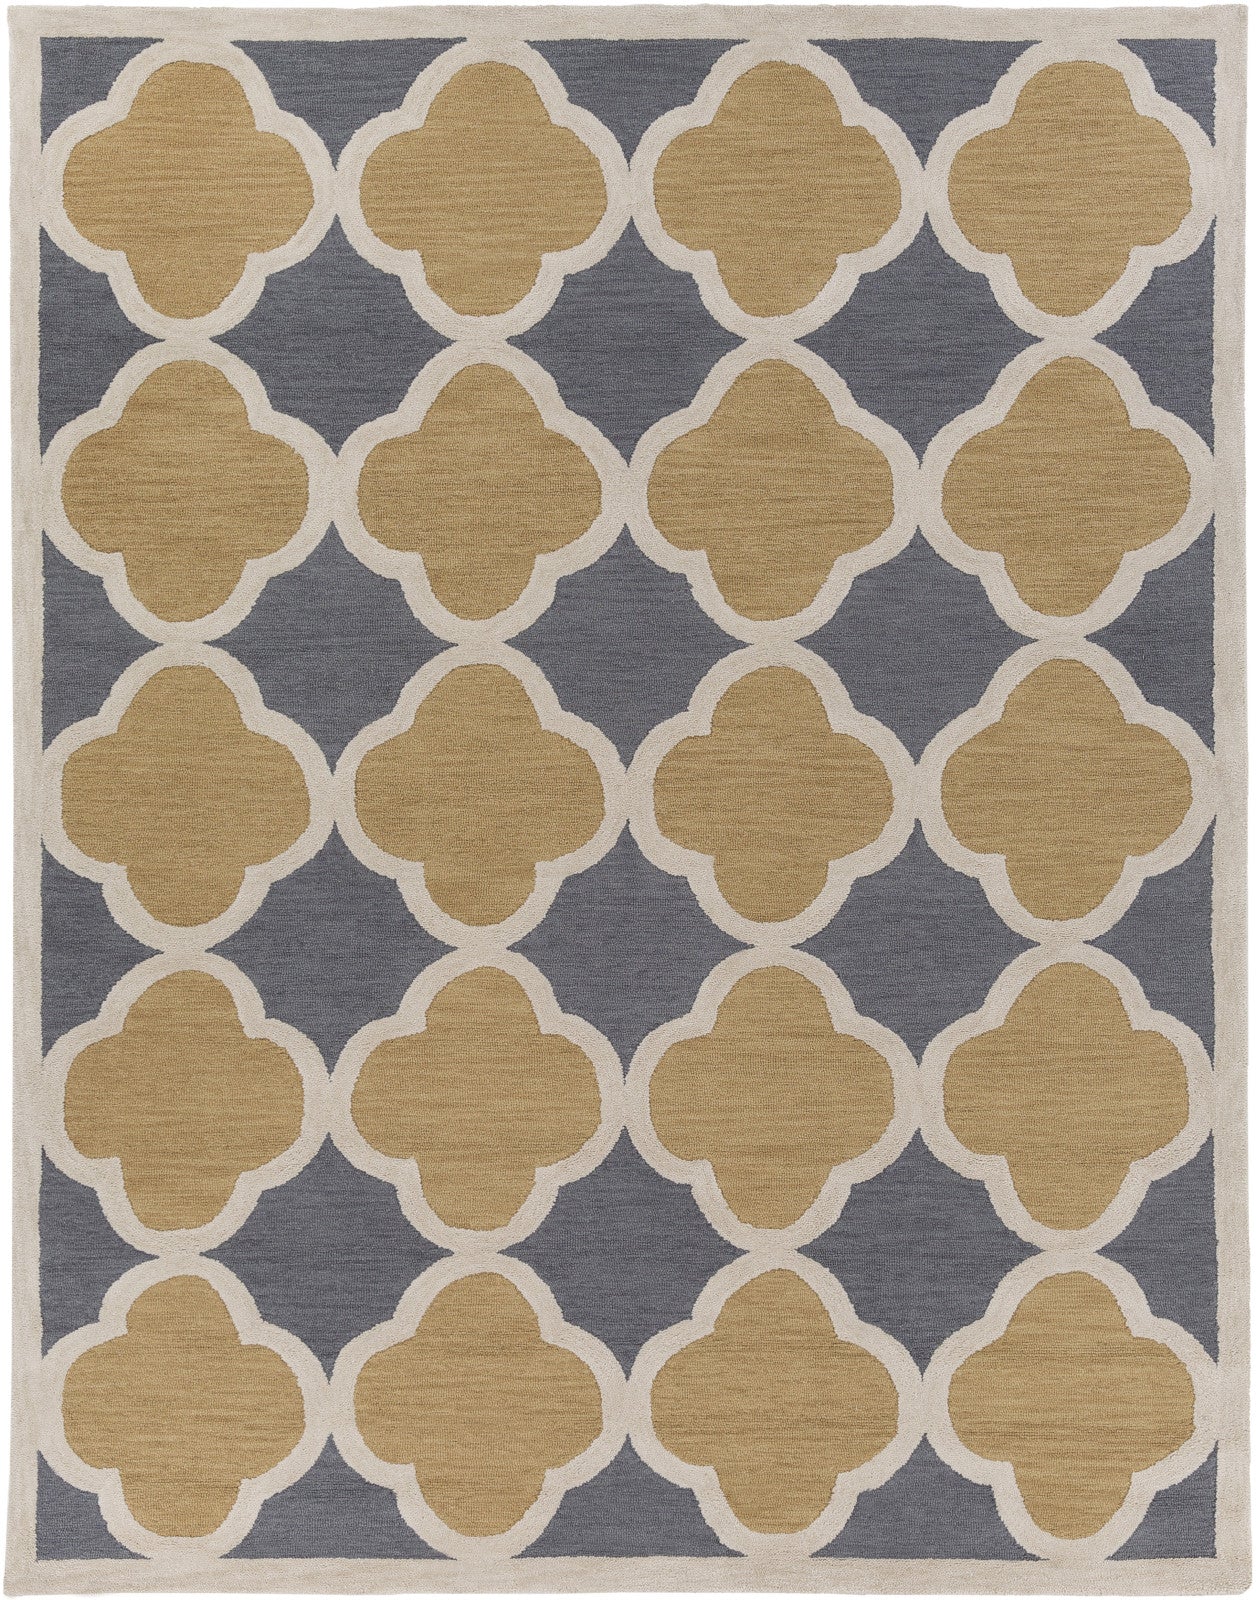 Artistic Weavers Holden Maisie Straw/Charcoal Area Rug main image